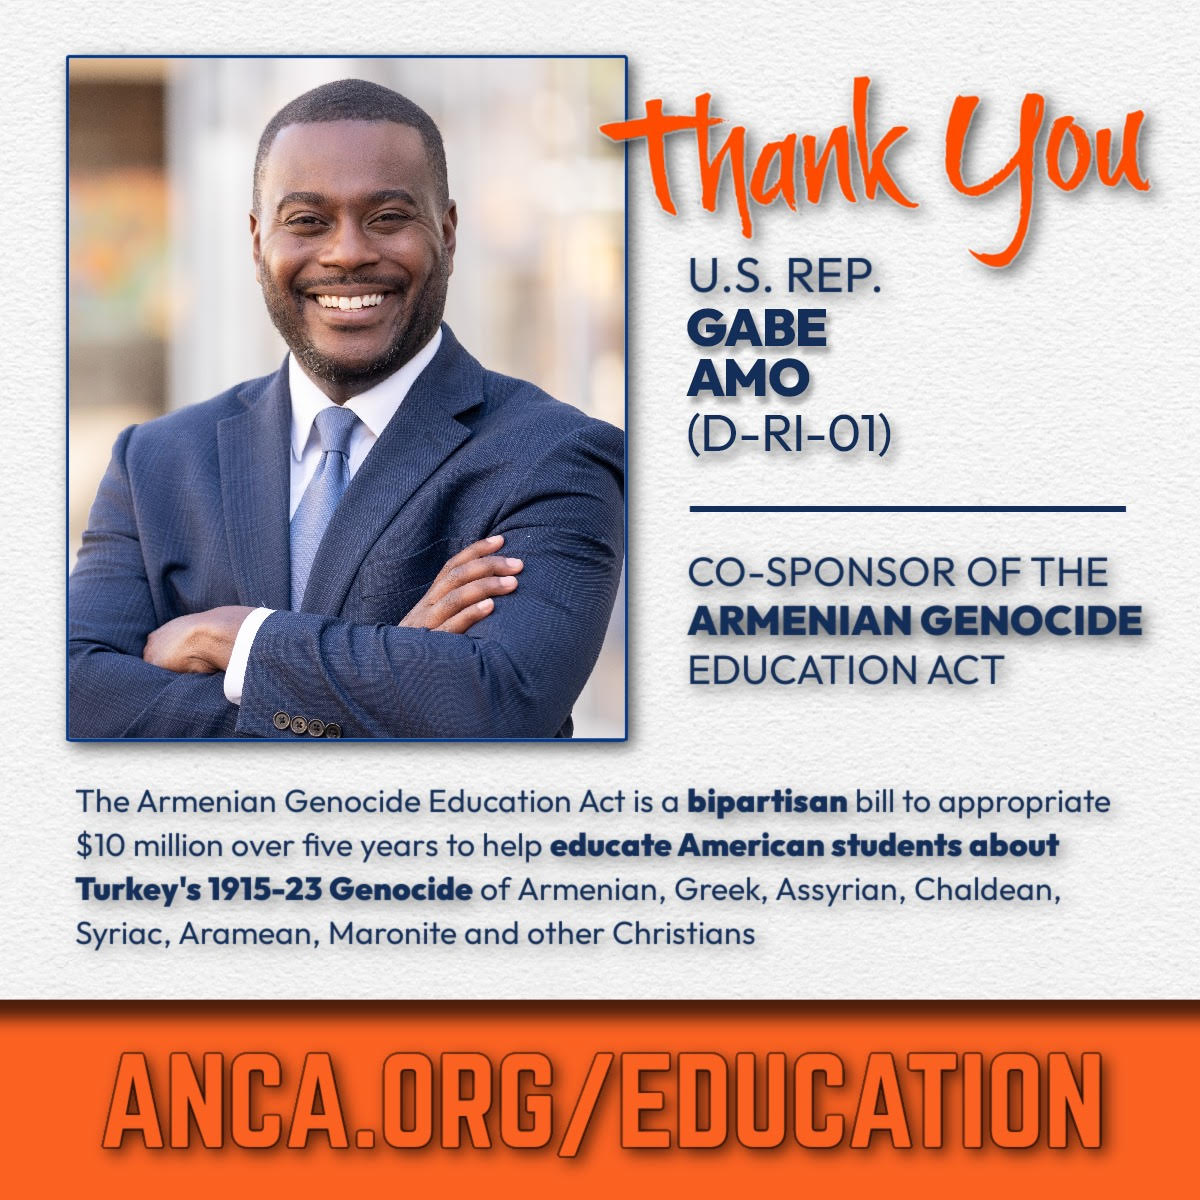 ANCA thanks @gabeamo for cosponsoring the Armenian Genocide Education Act, a bipartisan bill to educate American students on Turkey's still unpunished 1915-23 Genocide of #Armenian, #Greek, #Assyrian, #Chaldean, #Syriac, #Aramean, #Maronite, & other #Christian martyrs.